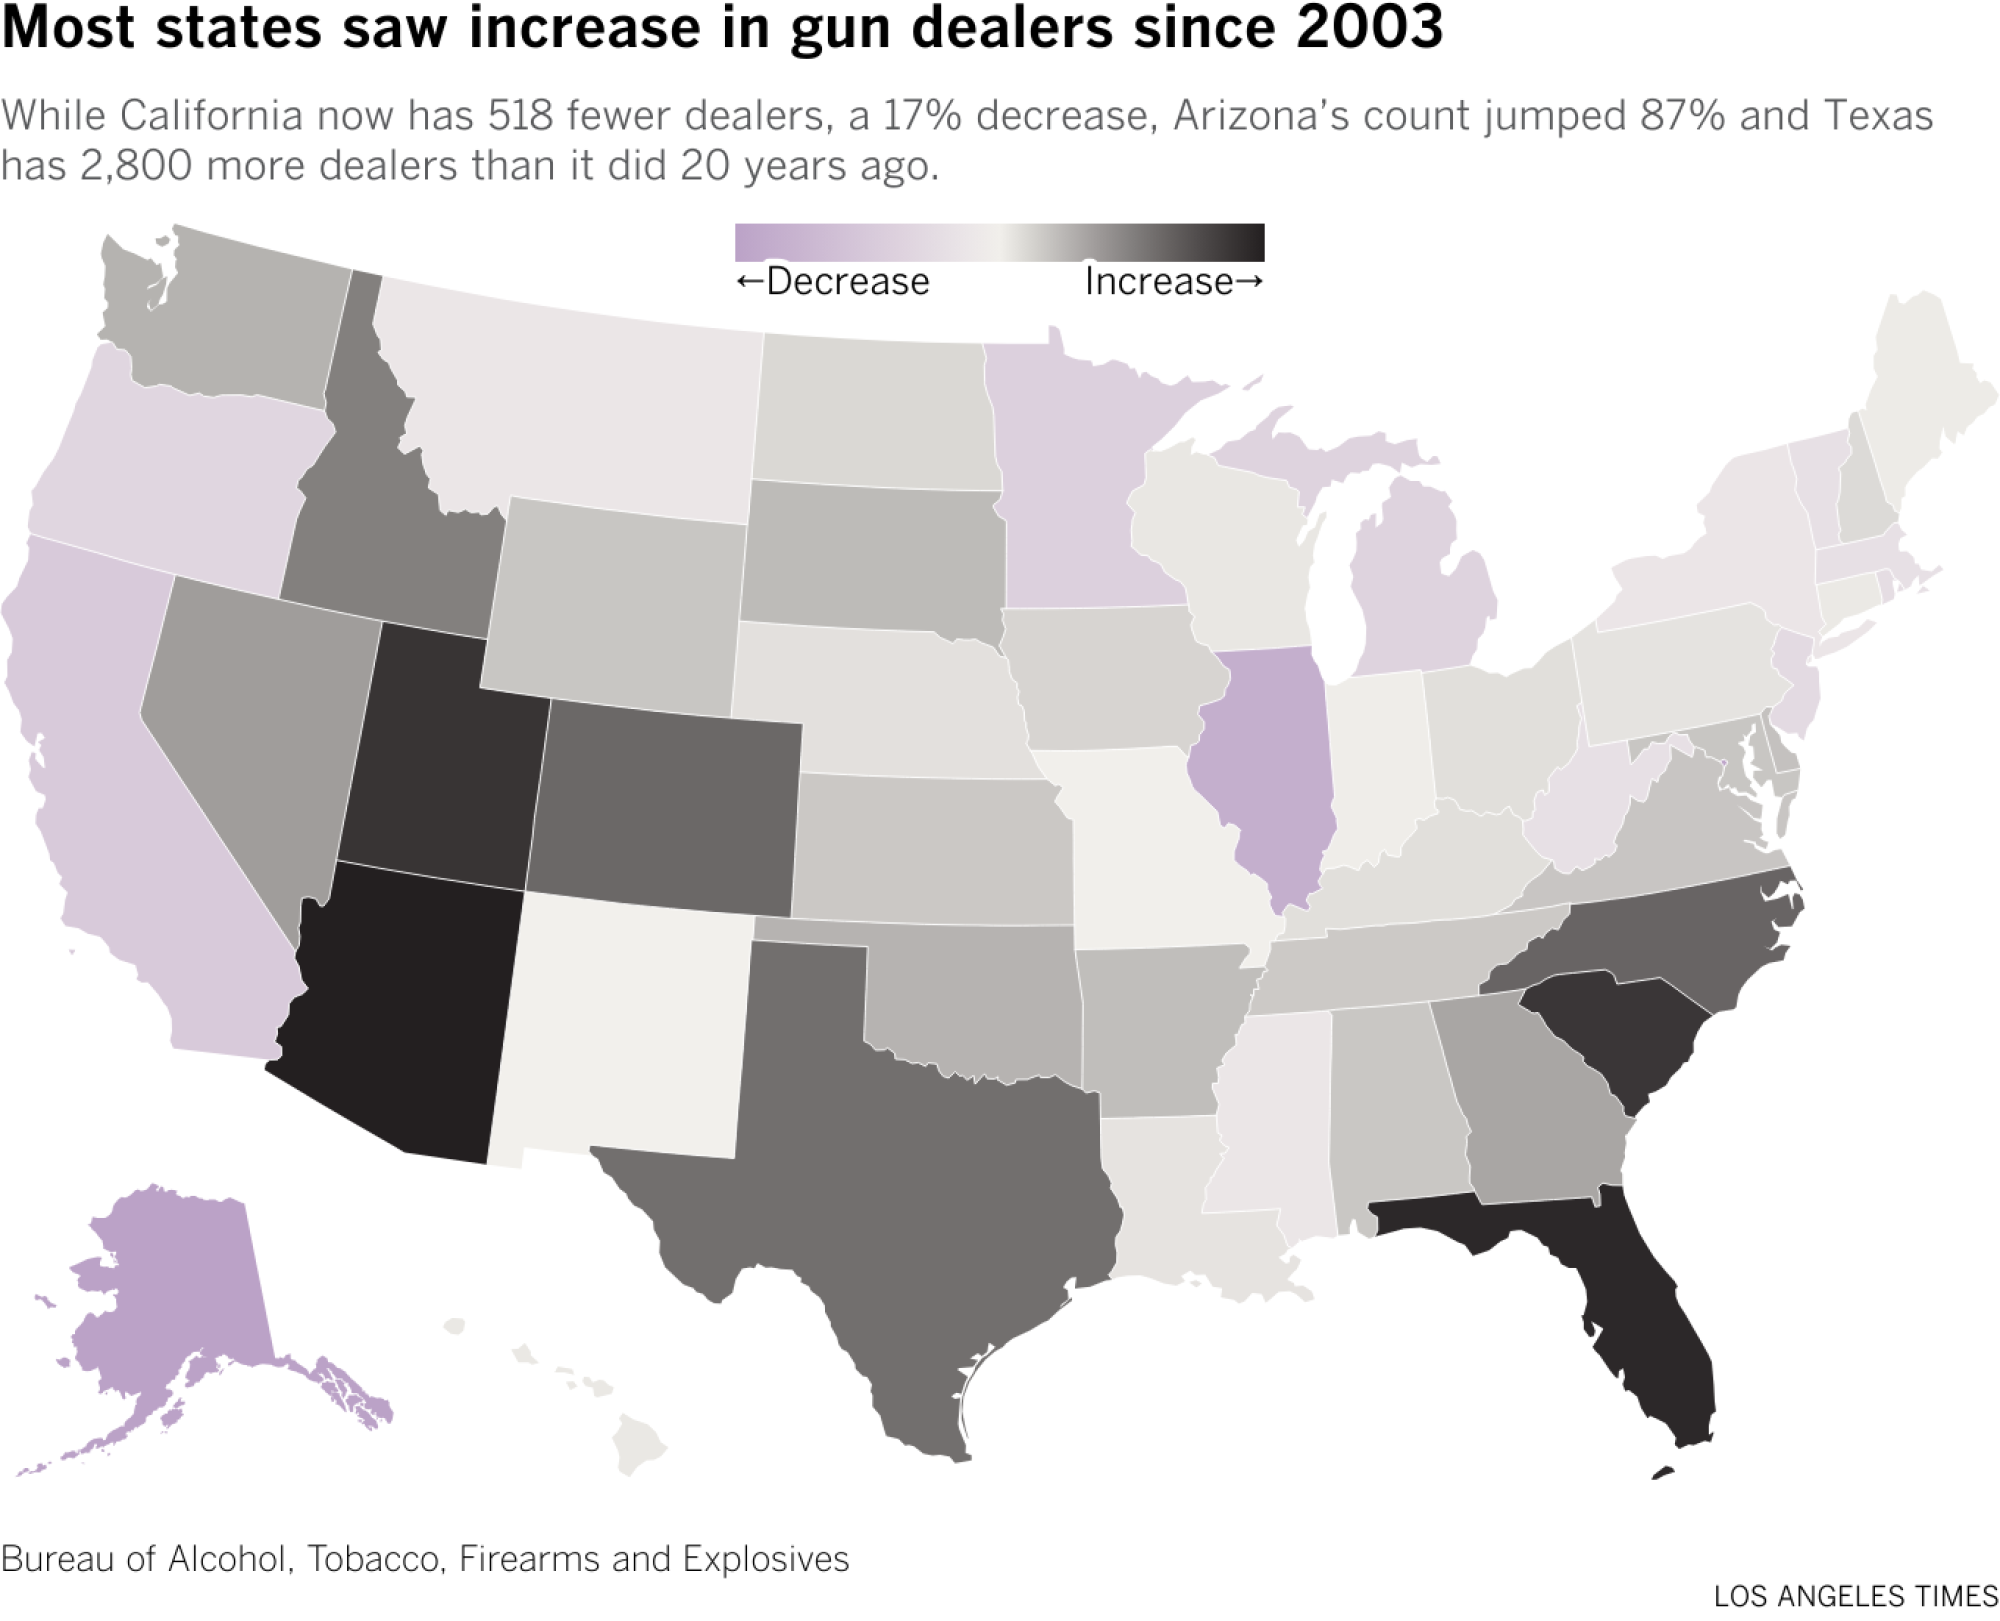 Map of the United States shaded to show the change in number of gun dealers for each state from 2003 to 2023. Arizona and Florida had the largest increase, while Illinois and Alaska had the biggest decrease.